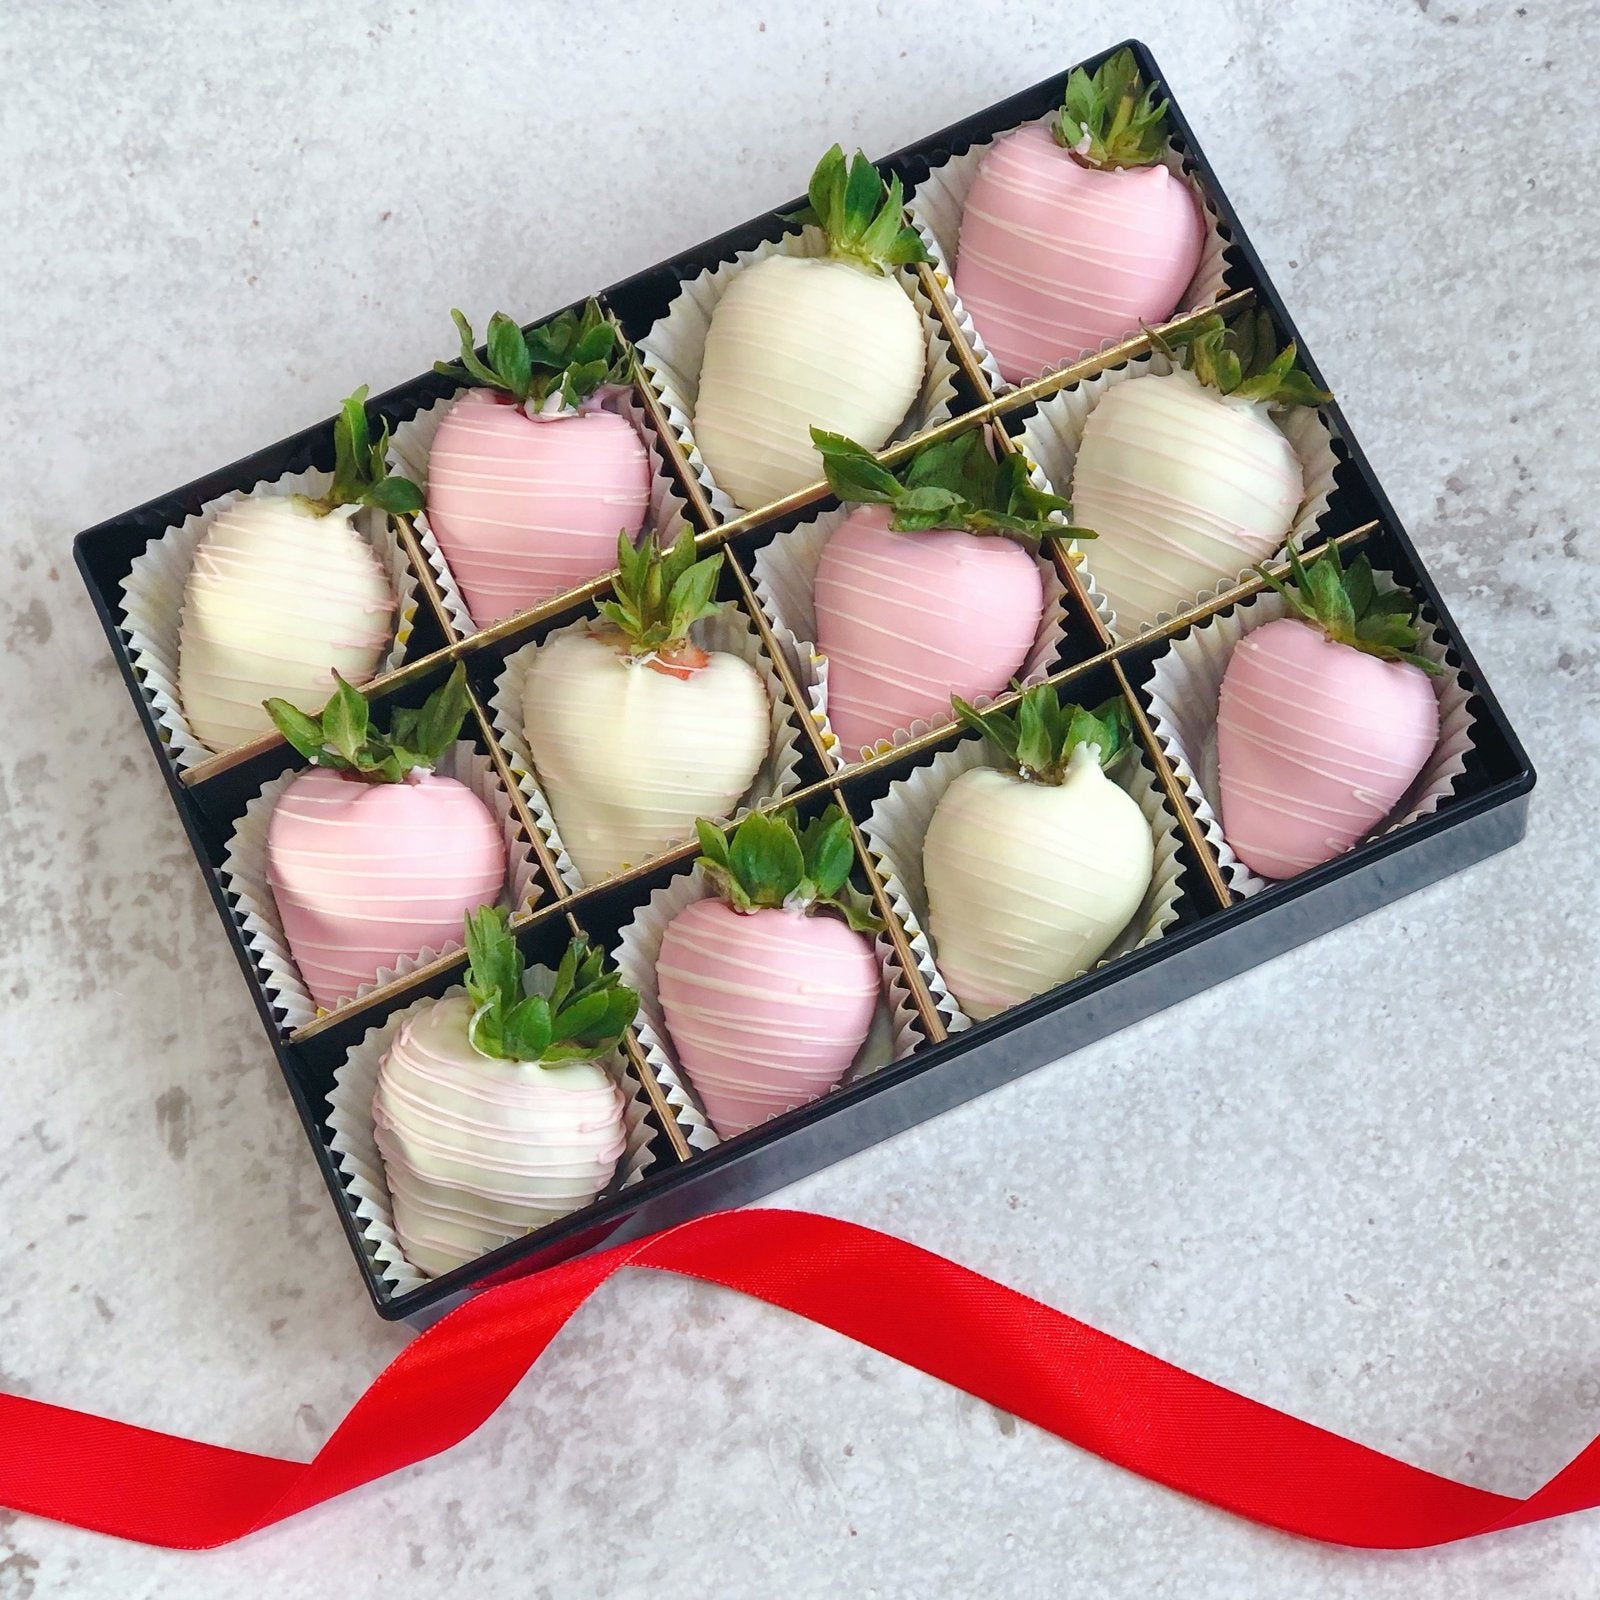 Send Chocolate Gifts, Gift Baskets & Hampers to Singapore Online